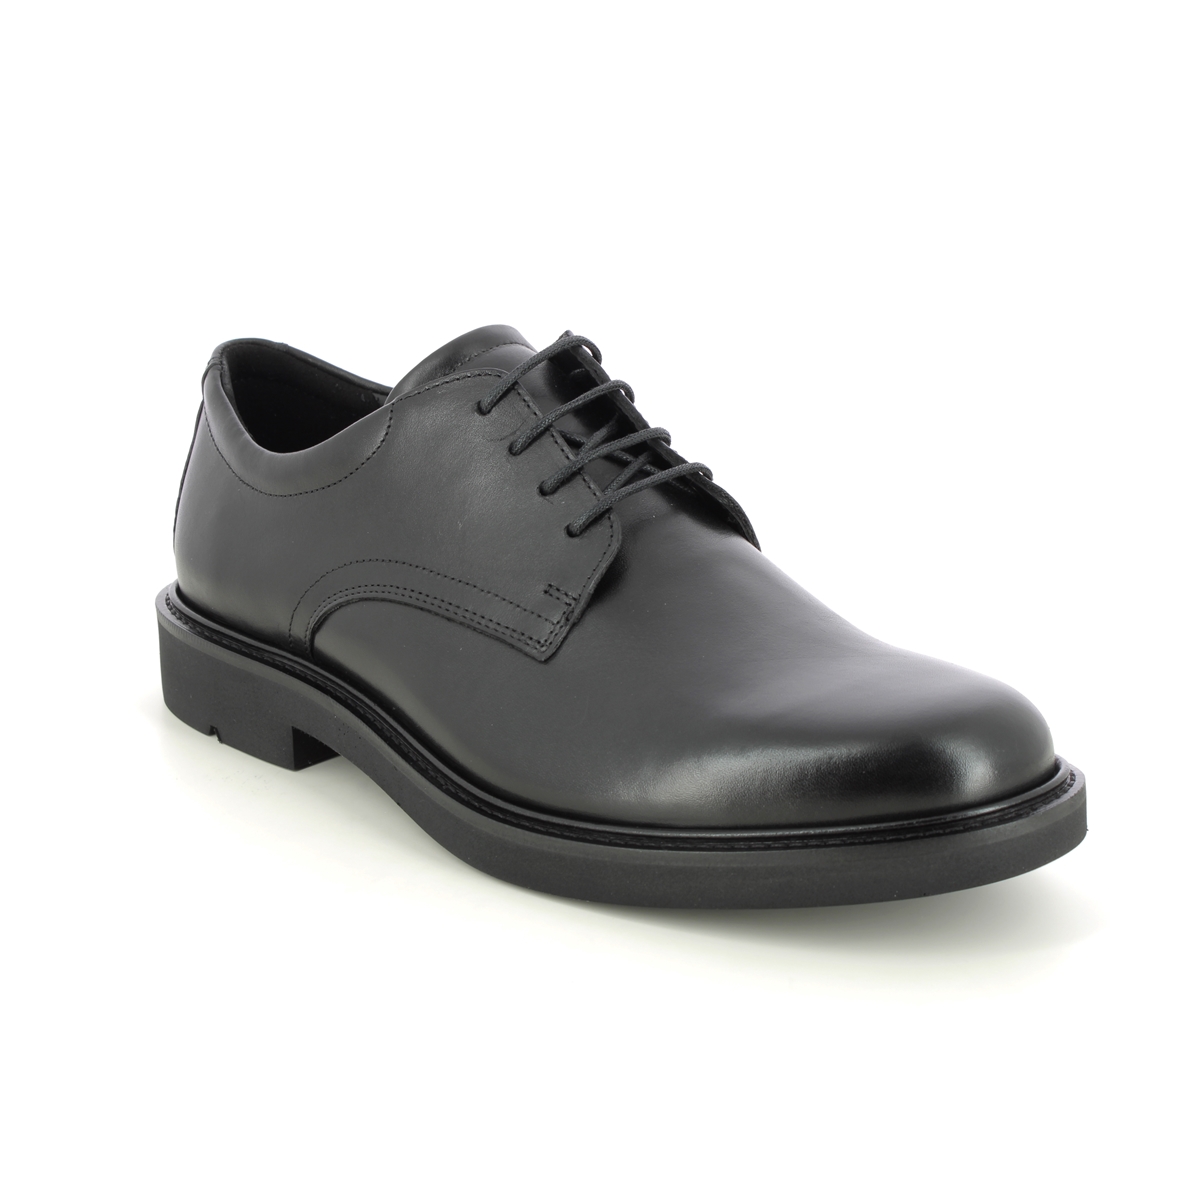 Ecco London Metropole Black Leather Mens Formal Shoes 525604-01001 In Size 41 In Plain Black Leather